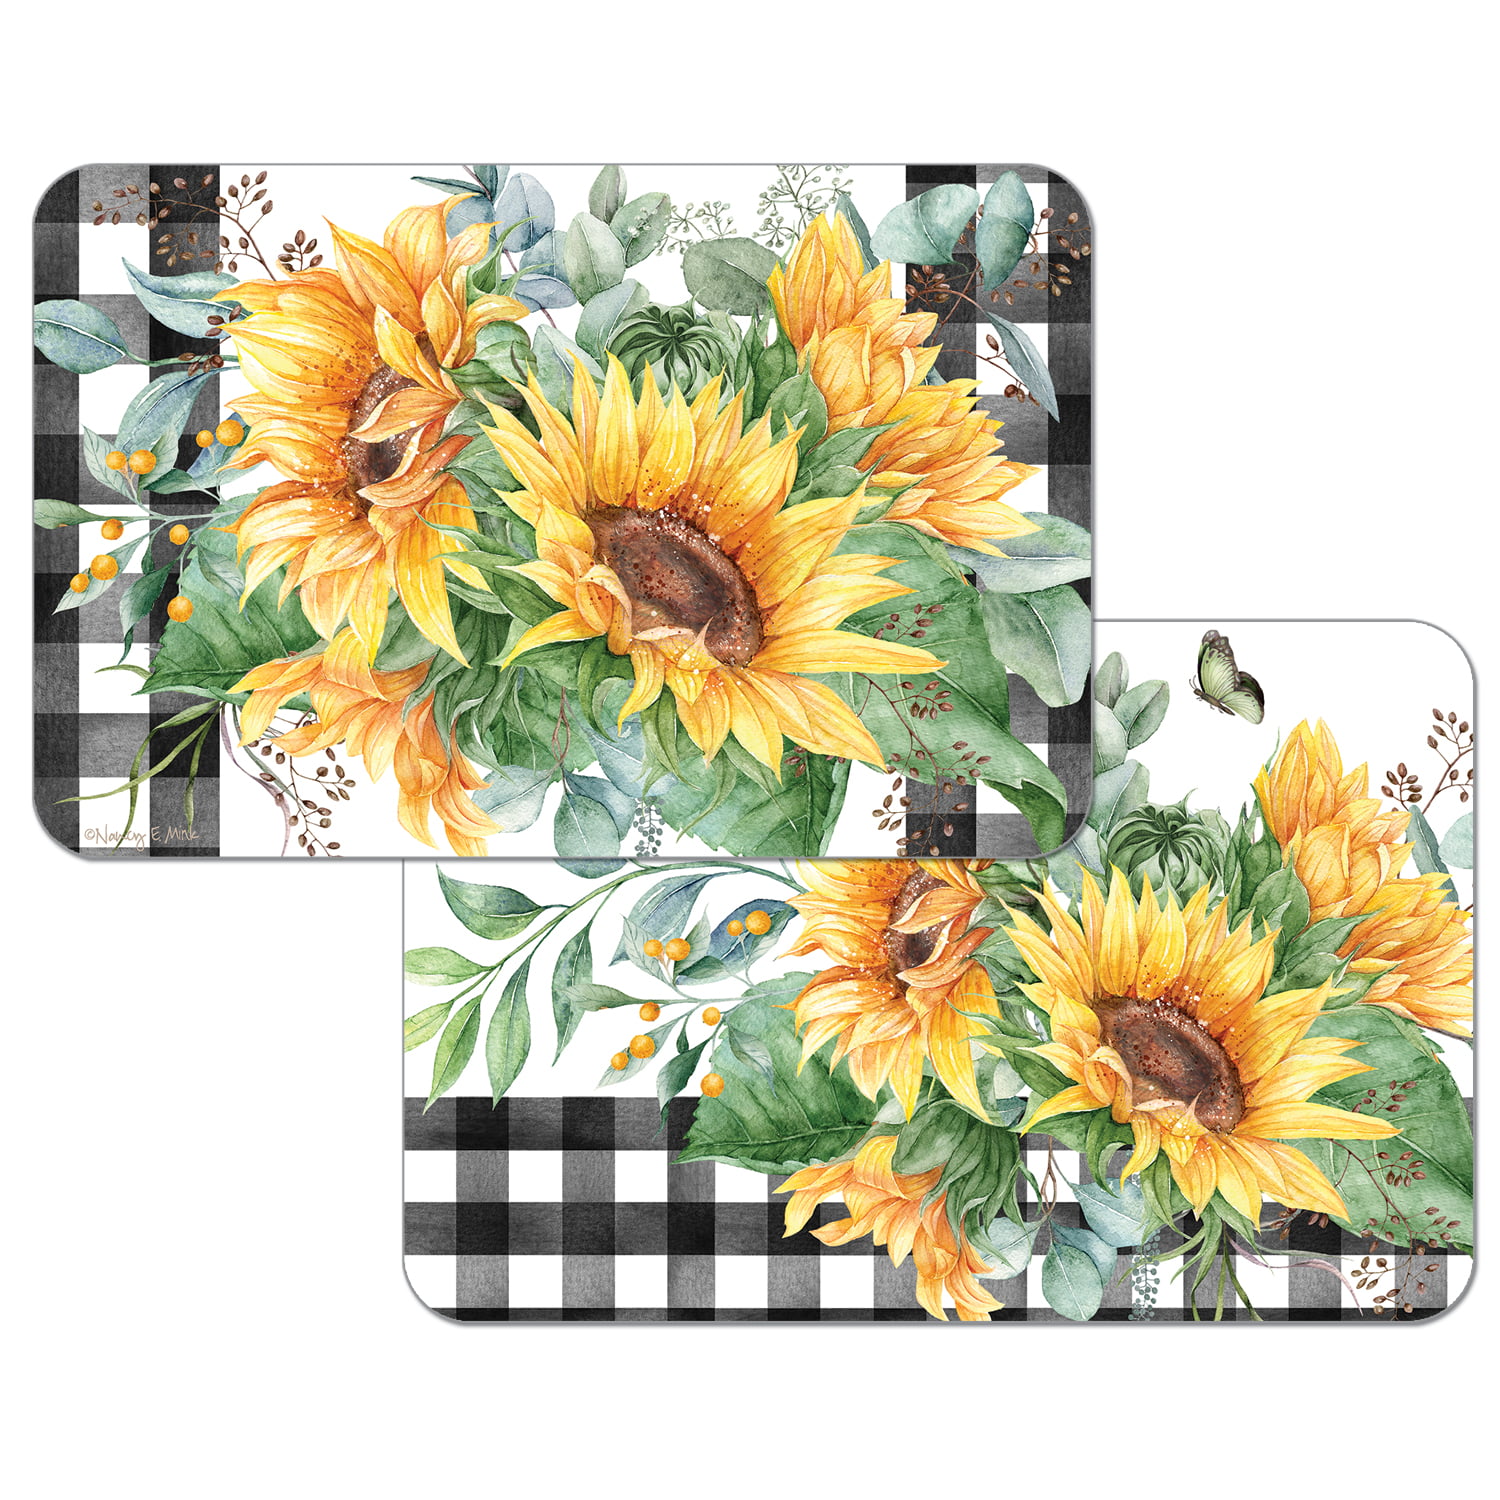 Yellow Sunflowers Linen Woven Heat Resistant Placemats Washable Place Mats Non Slip Wipeable Easy to Clean for Home Kitchen Dining Table 12x18inx4 